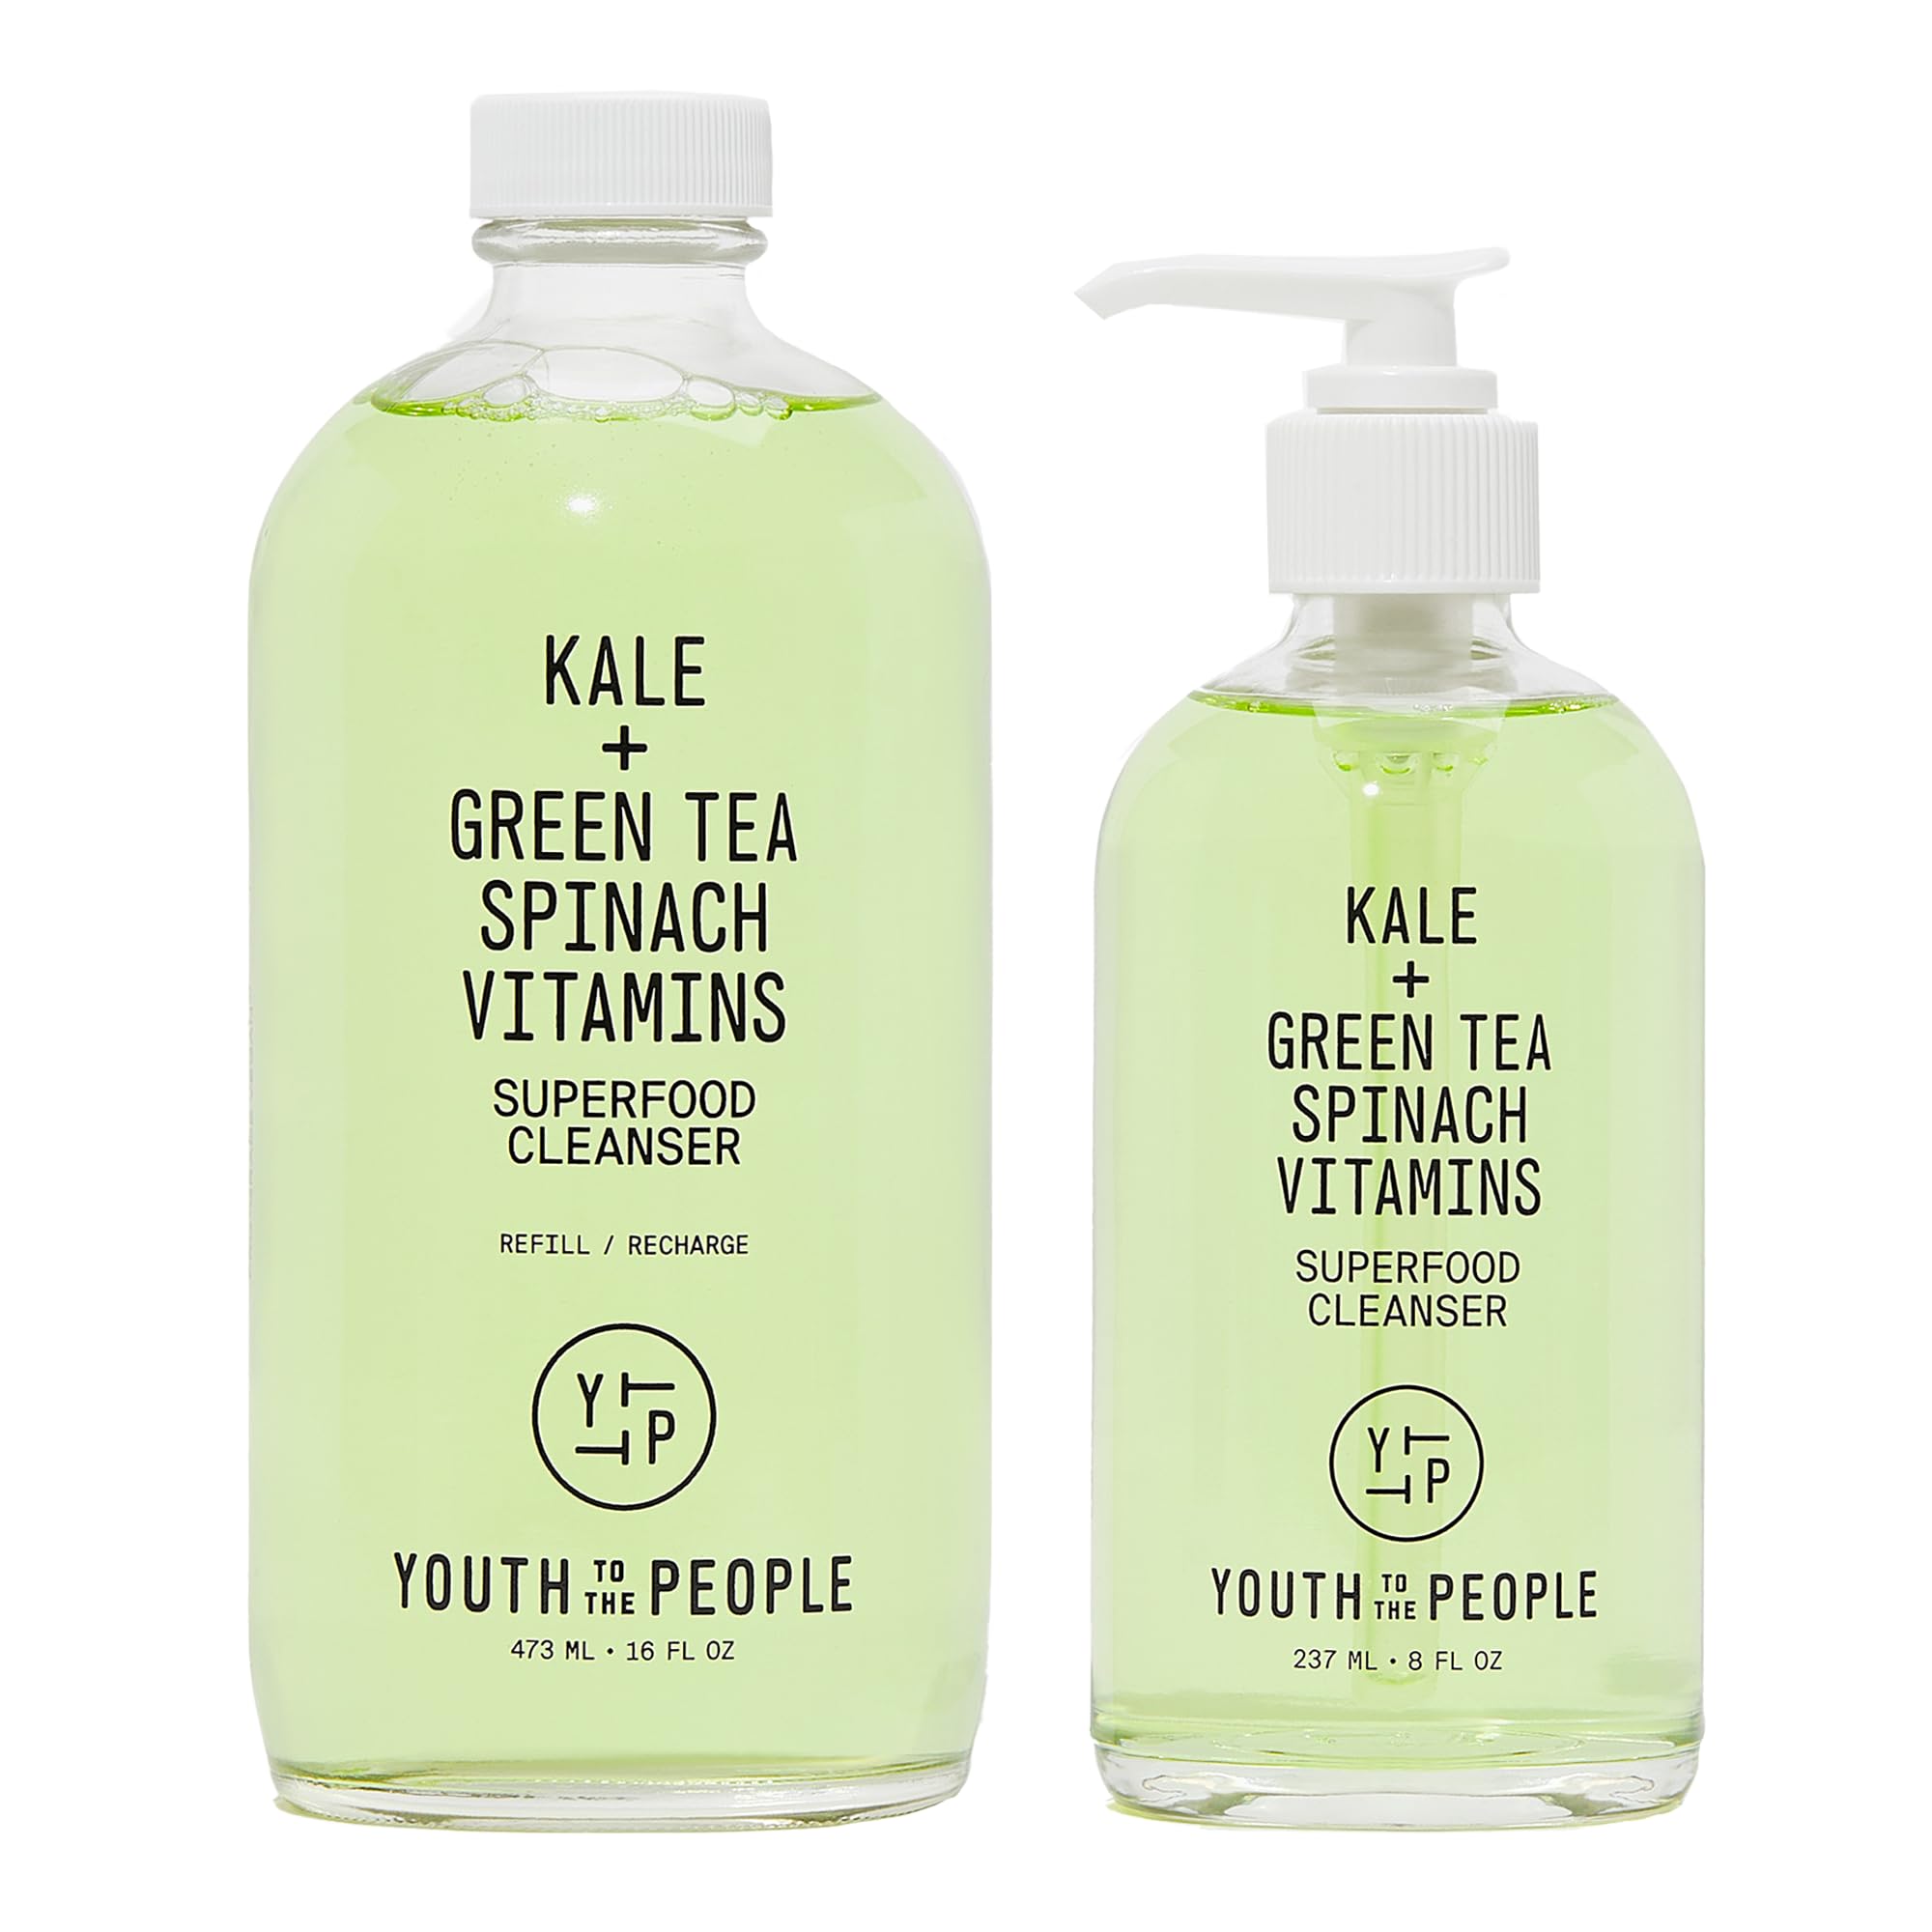 Youth To The People Superfood Cleanser Refill Kit - 8oz Pump Bottle + 16oz Refill - pH Balanced, Non-Drying Gel Face Wash + Makeup Remover for All Skin Types